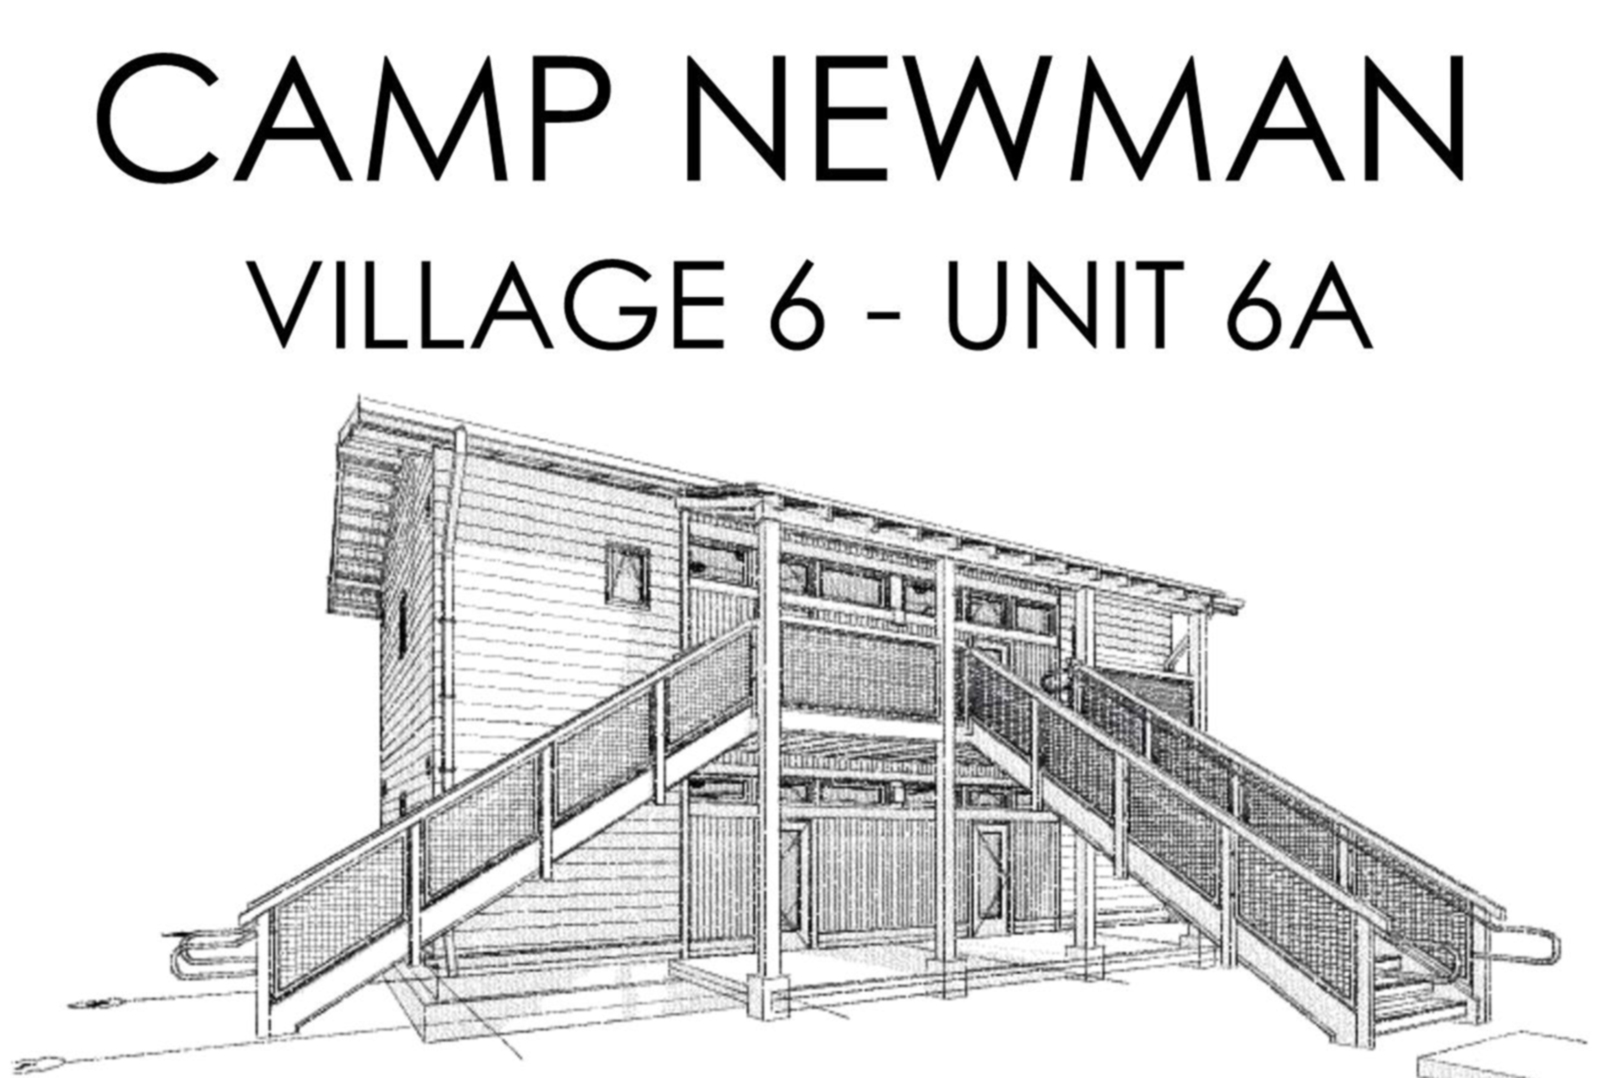 Camp Newman phase 2 blueprints completed by FDC in Sonoma County